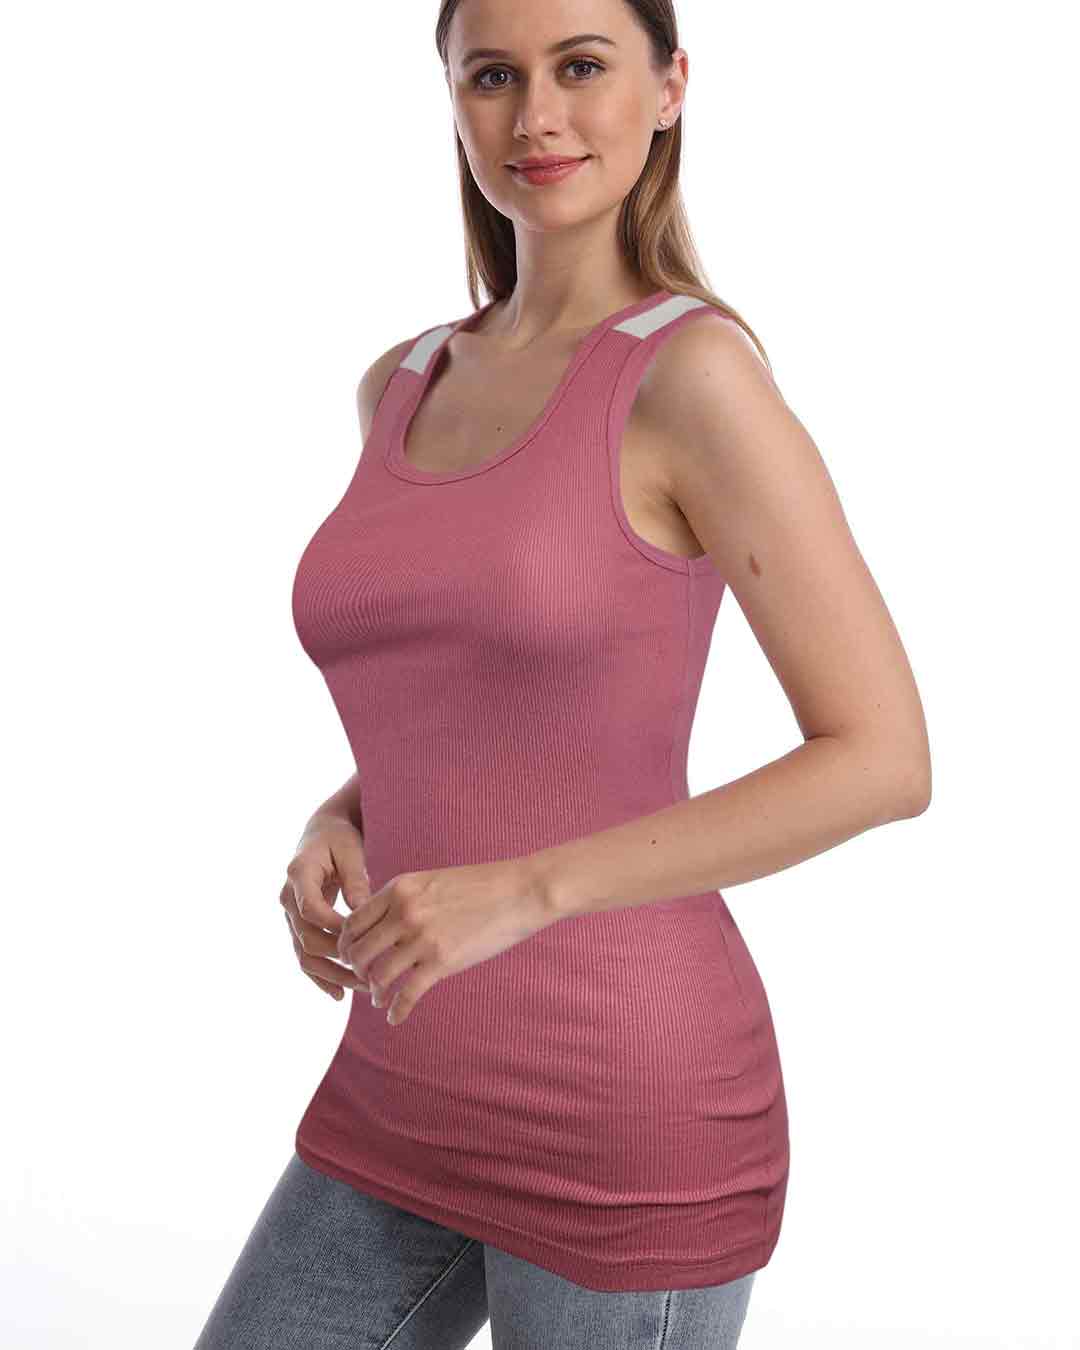 Organic Cotton Tank Tops for Women Sleeveless Women's Workout Tops Premium  Quality & Soft Tank Tops Perfect for Summer Weather 